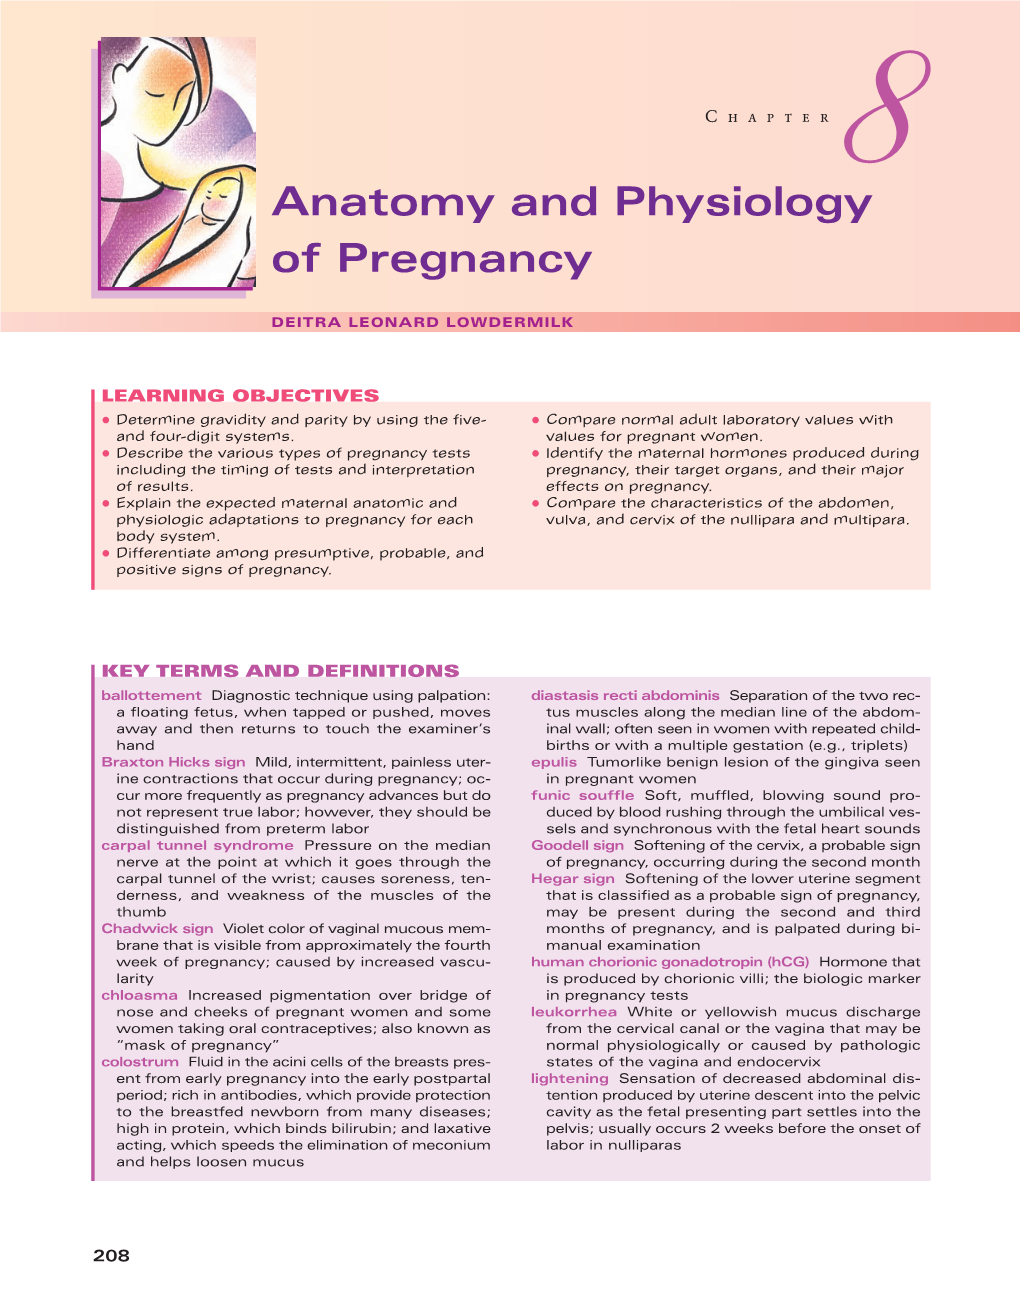 Anatomy and Physiology of Pregnancy 209